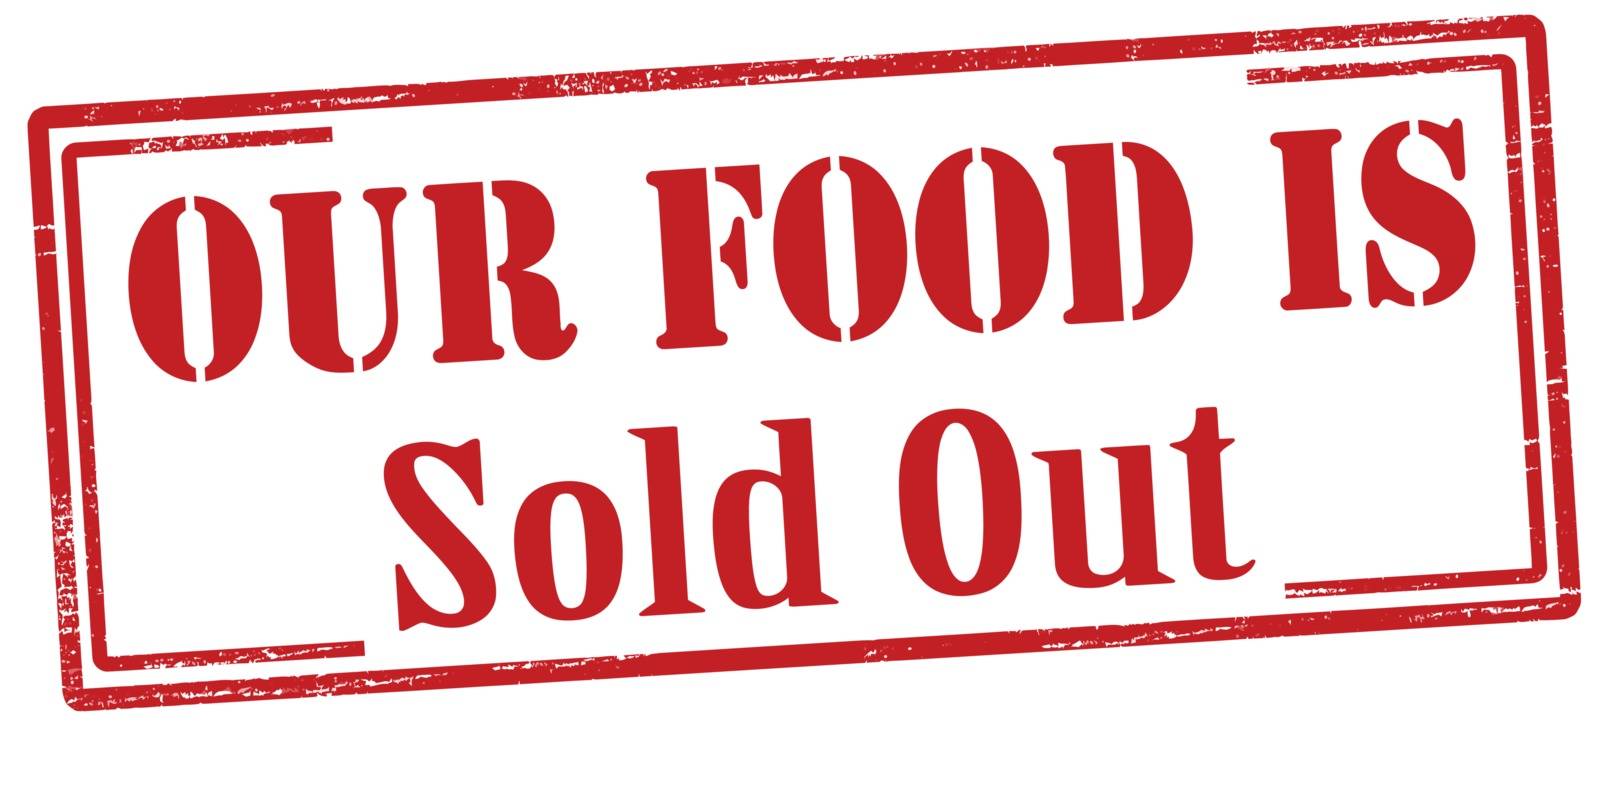 Our food is sold out by carmenbobo